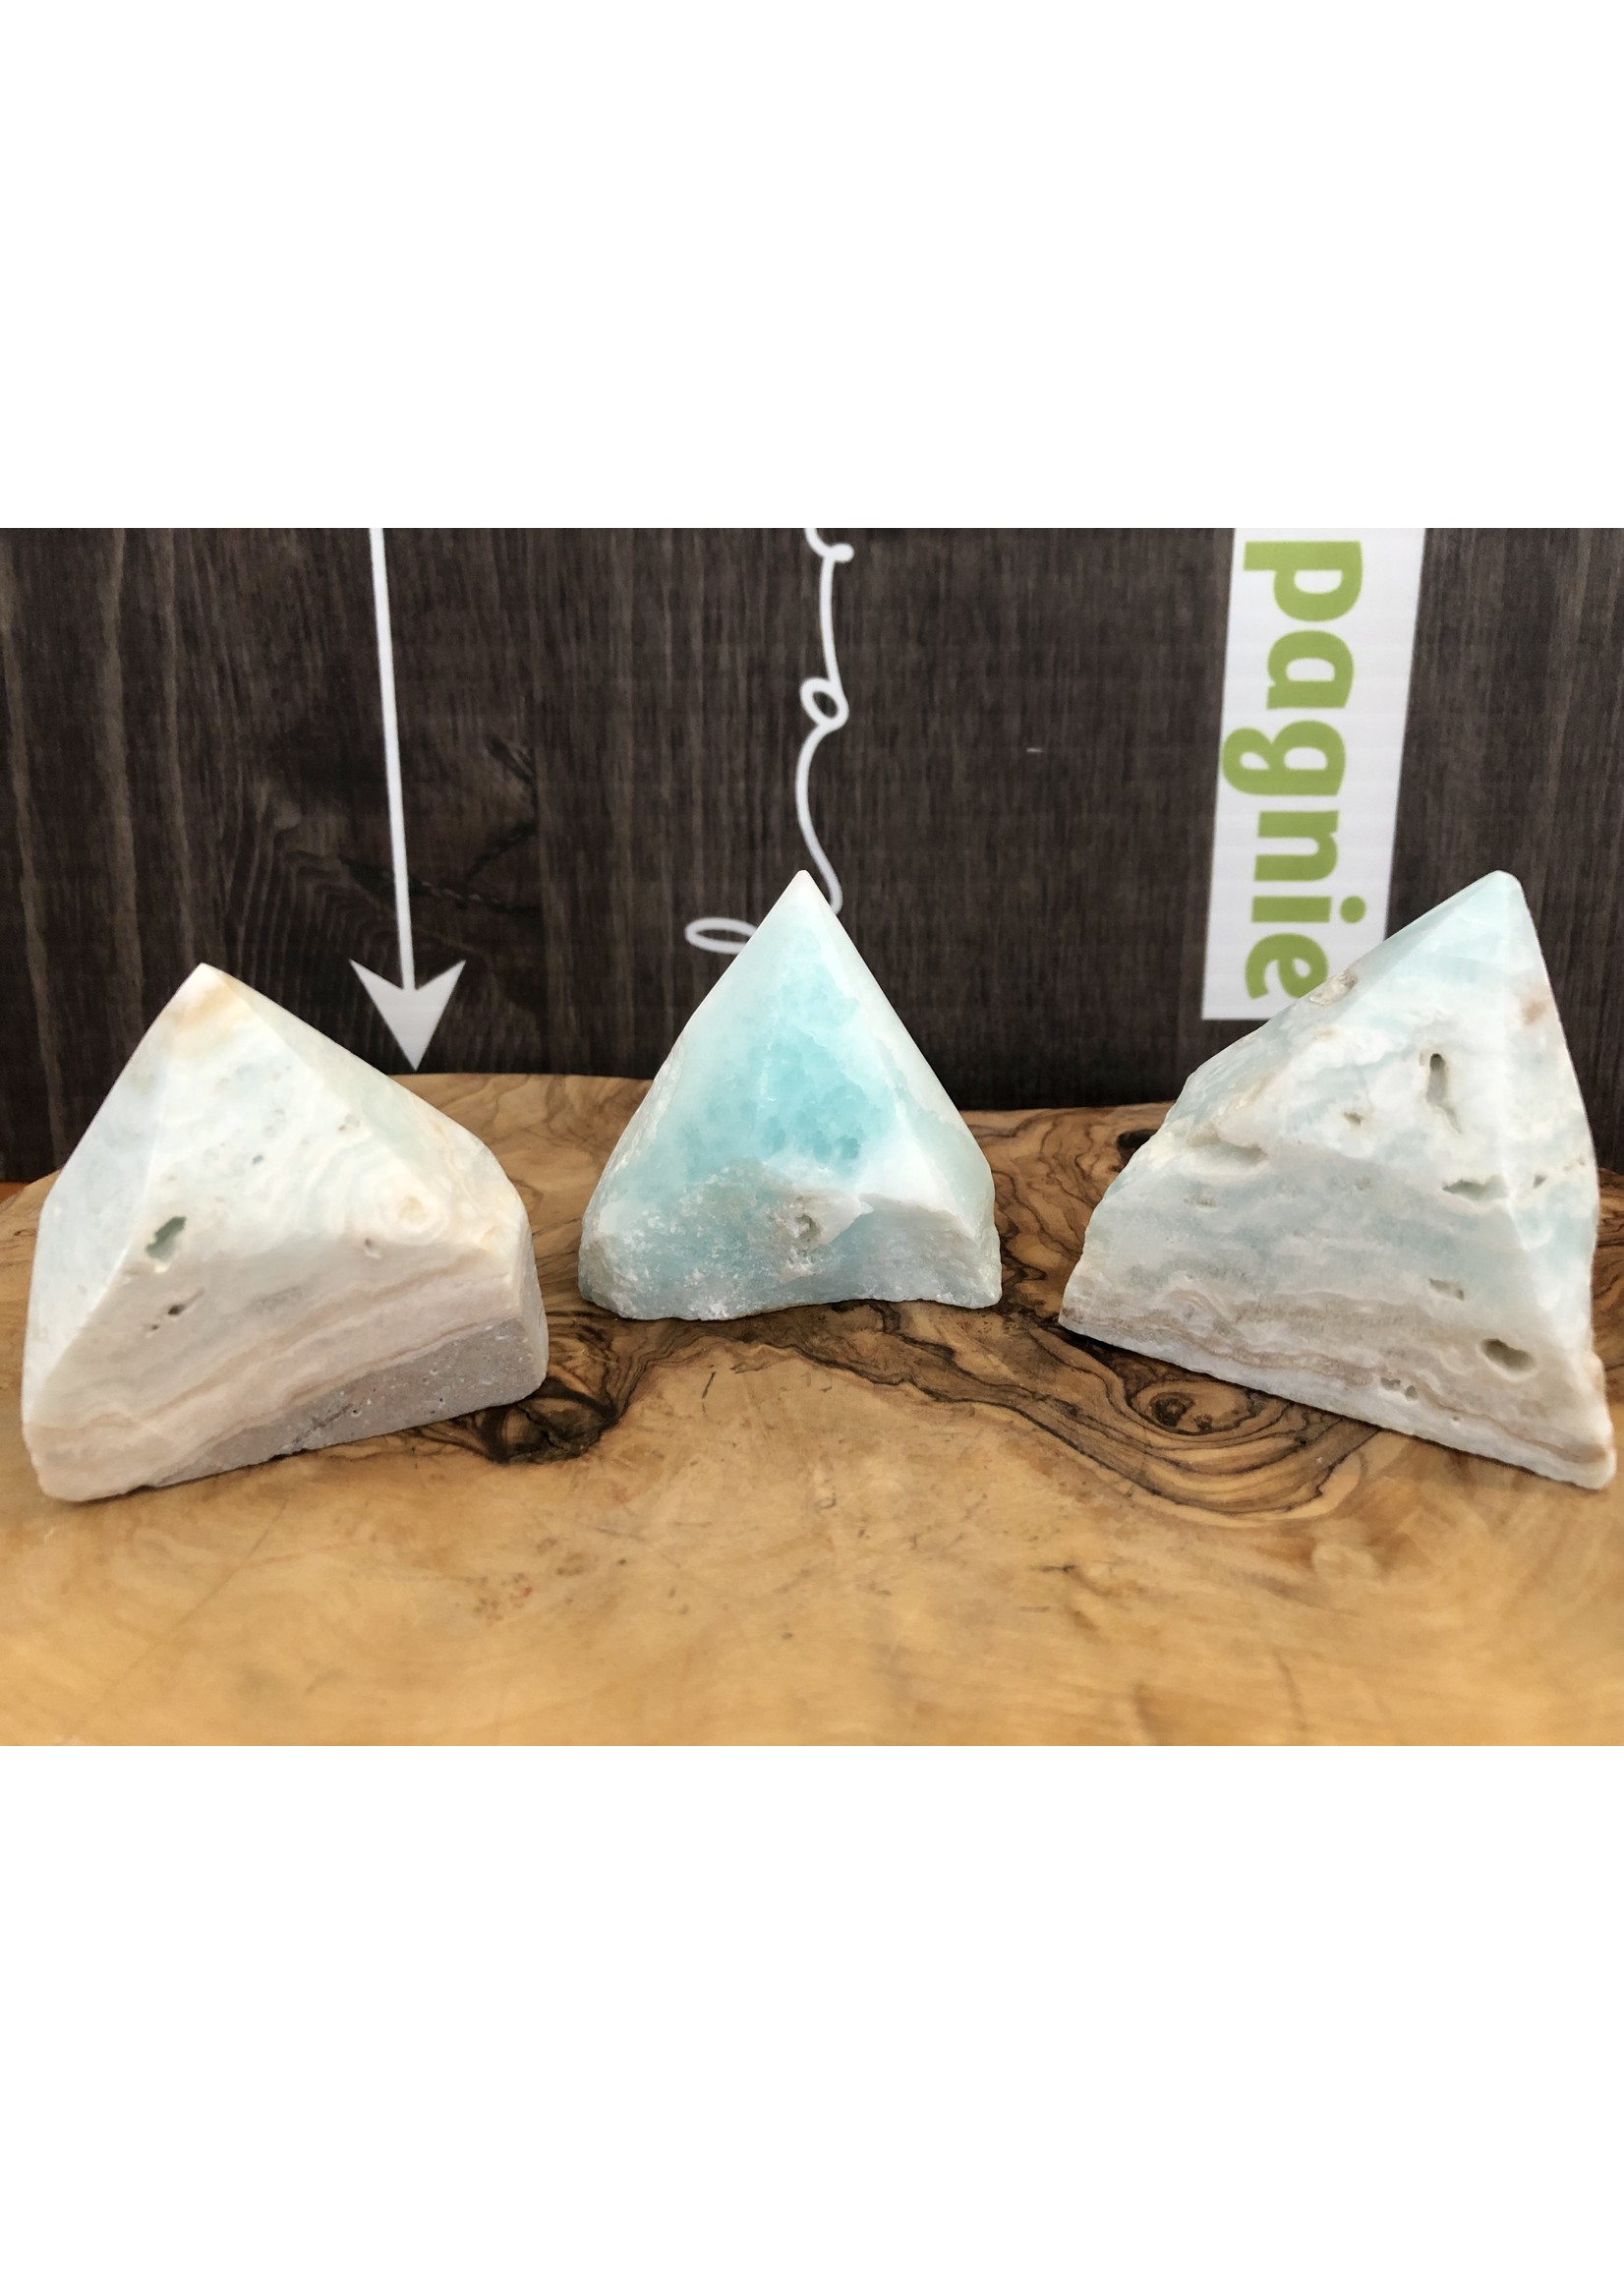 Caribbean Calcite Pyramid - Polished Top, Healing Wounds and Emotions